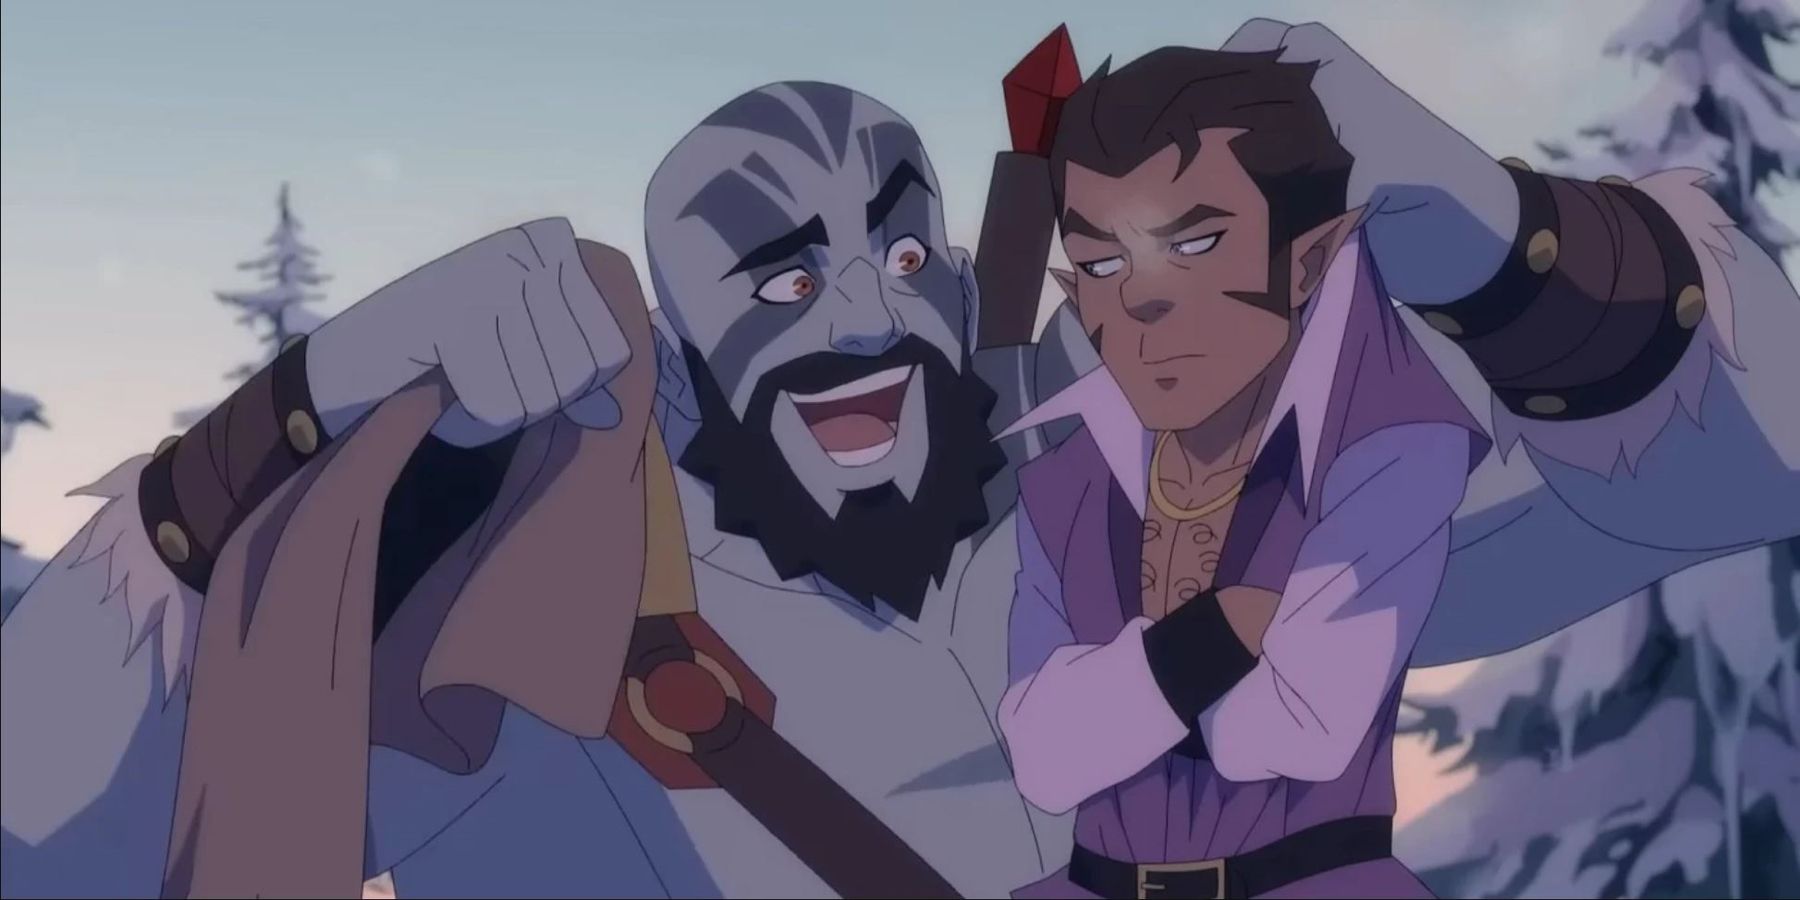 Still image of goliath barbarian Grog holding up gnome bard Scanlan in The Legend of Vox Machina